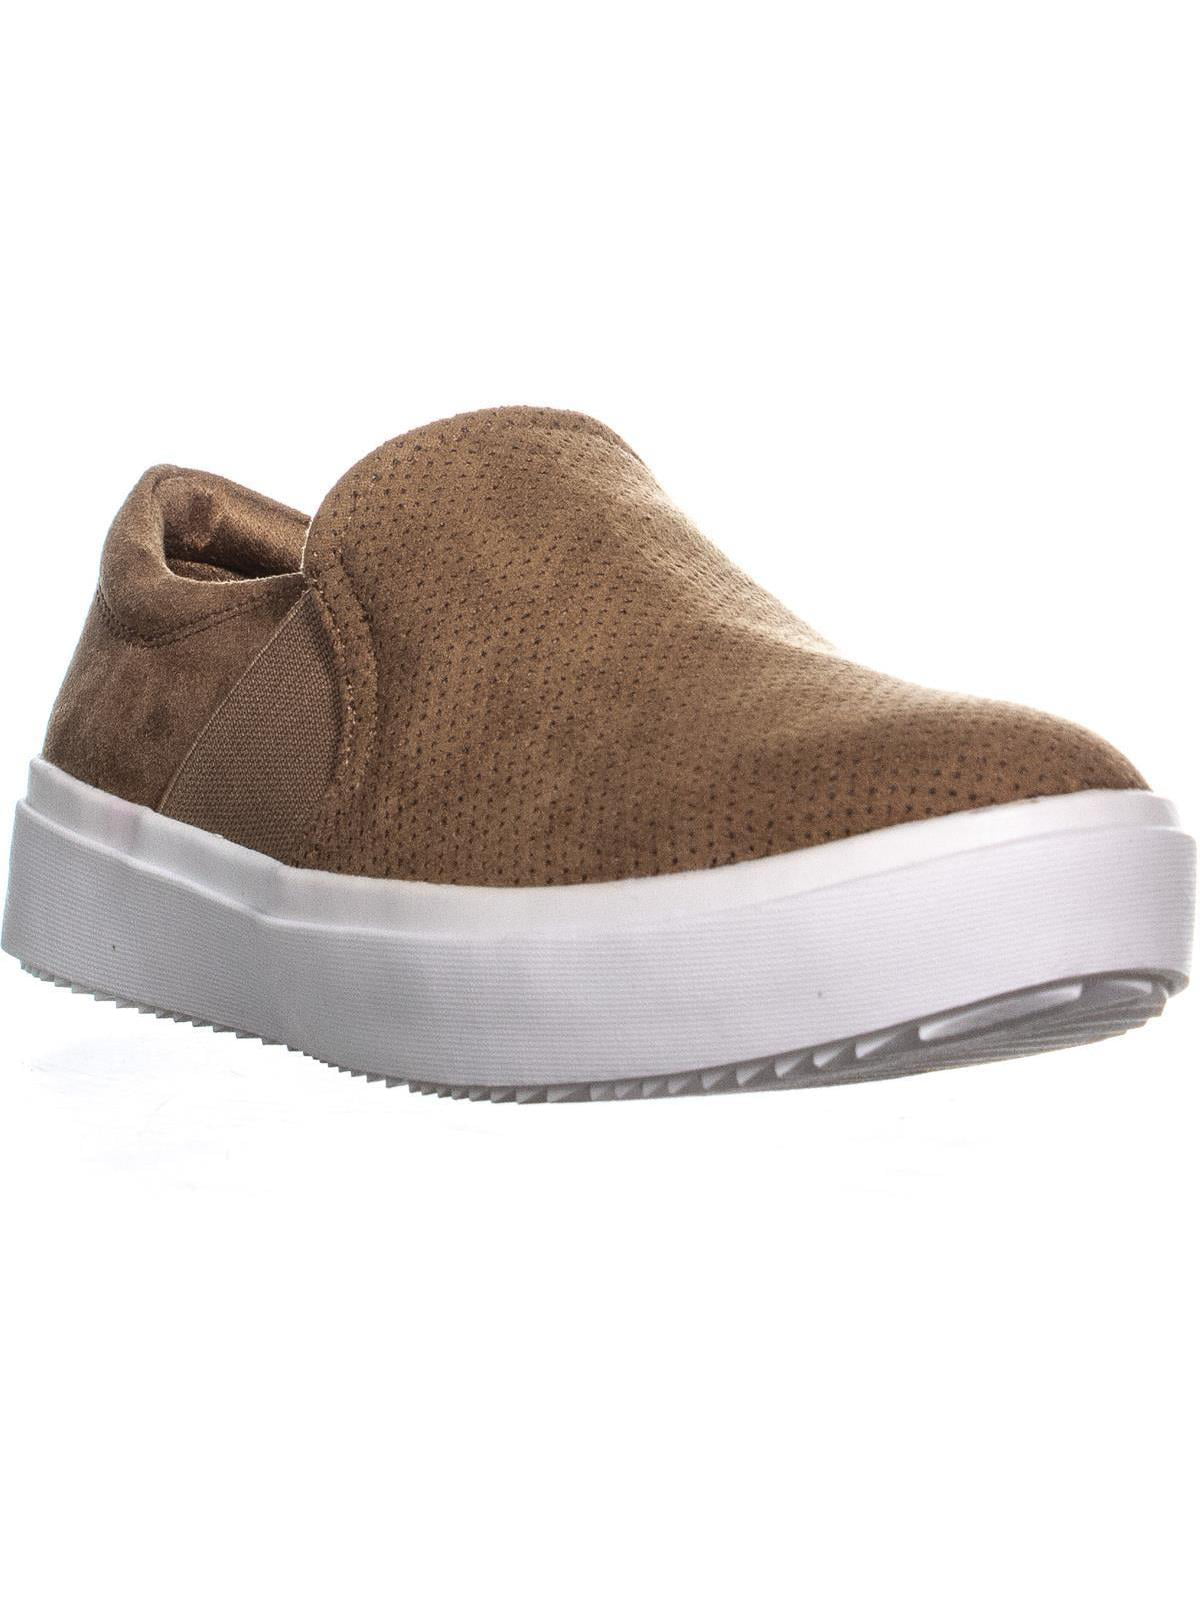 Womens Dr. Scholl's Wander Up Slip On 